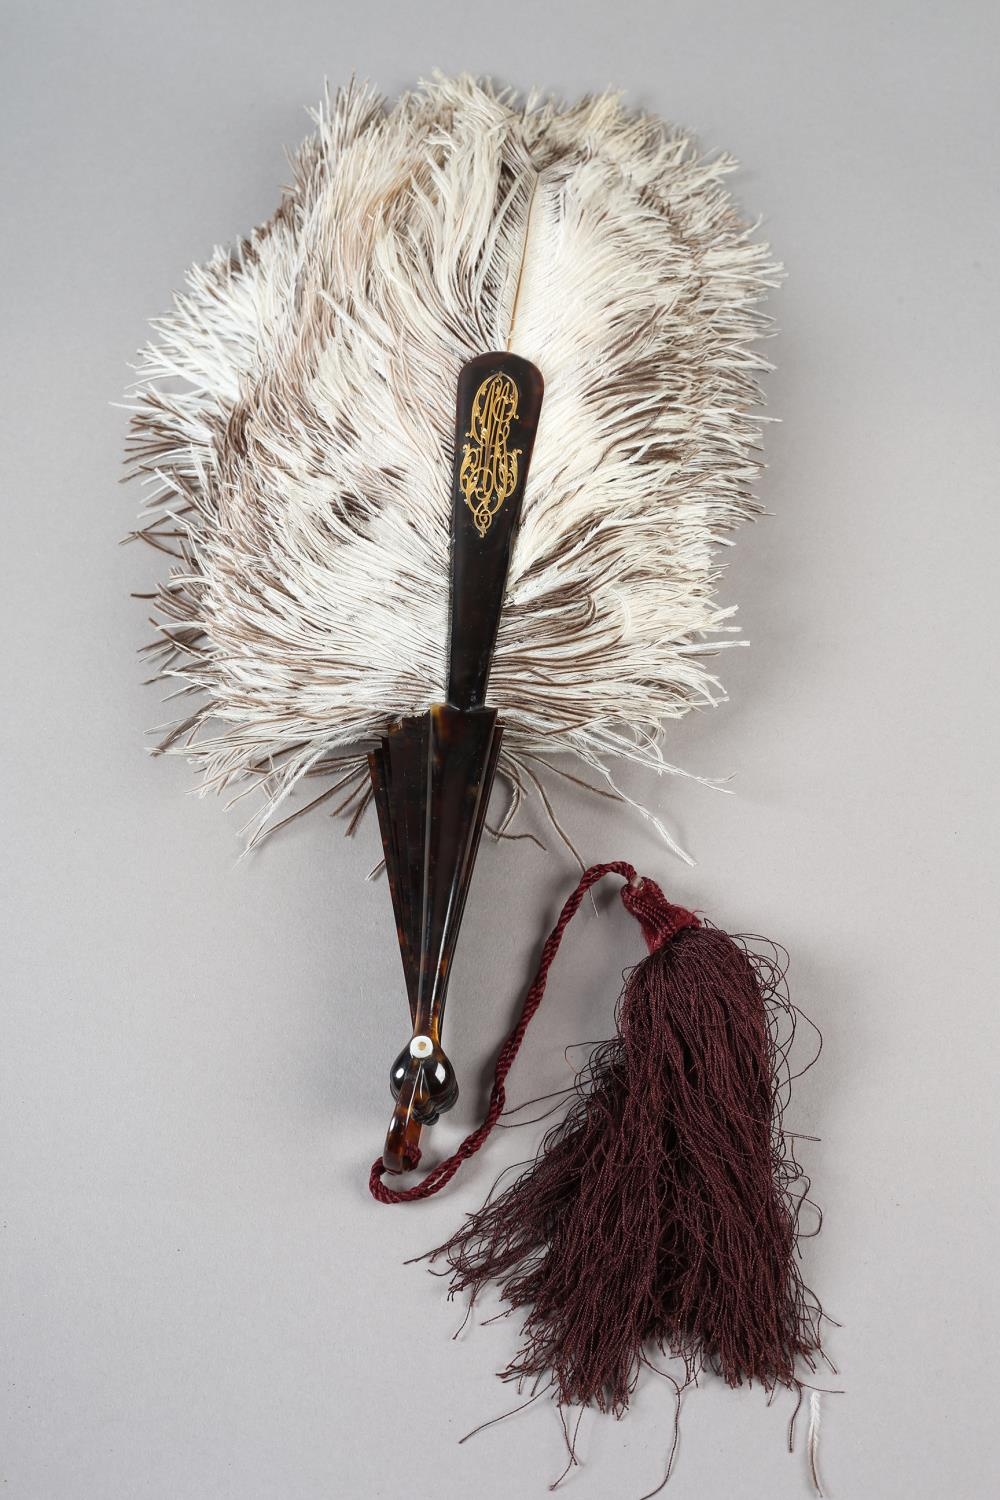 A Duvelleroy female ostrich feather fan, mounted on tortoiseshell, marked “Duvelleroy” in gold on - Image 4 of 4